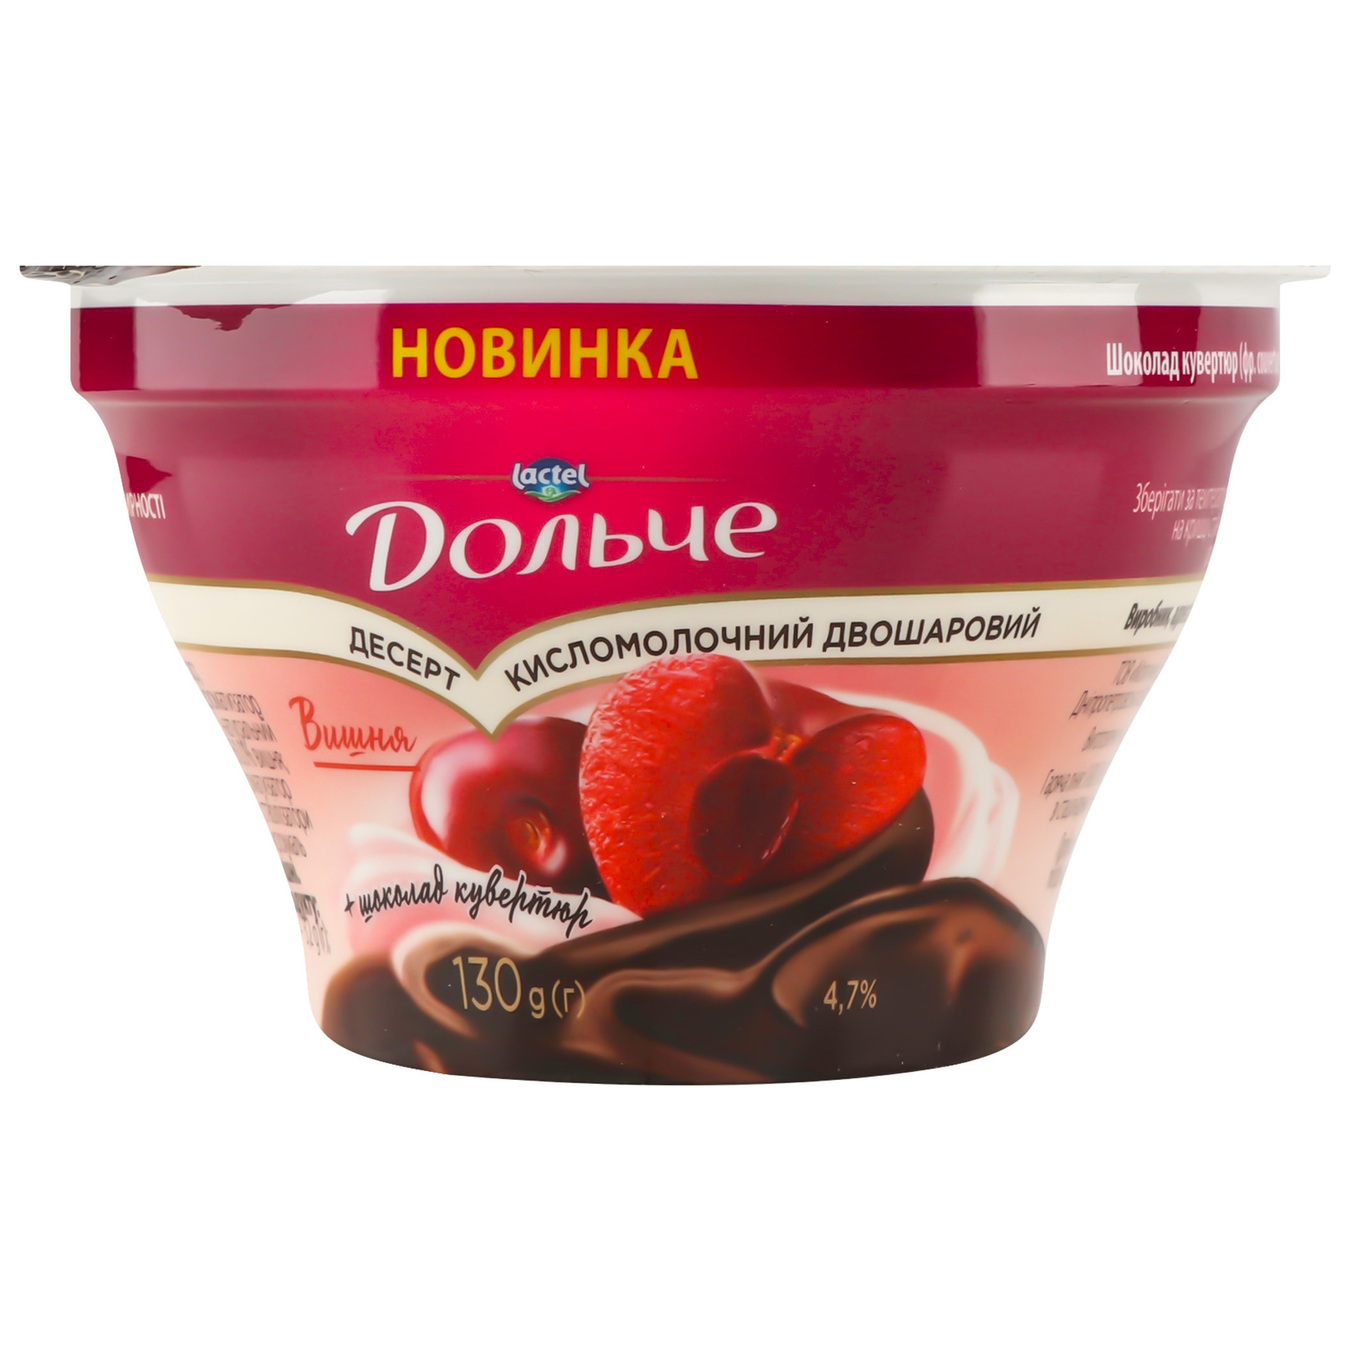 Dolce dessert with chocolate couverture and cherry fillings cup 4.7% 130g